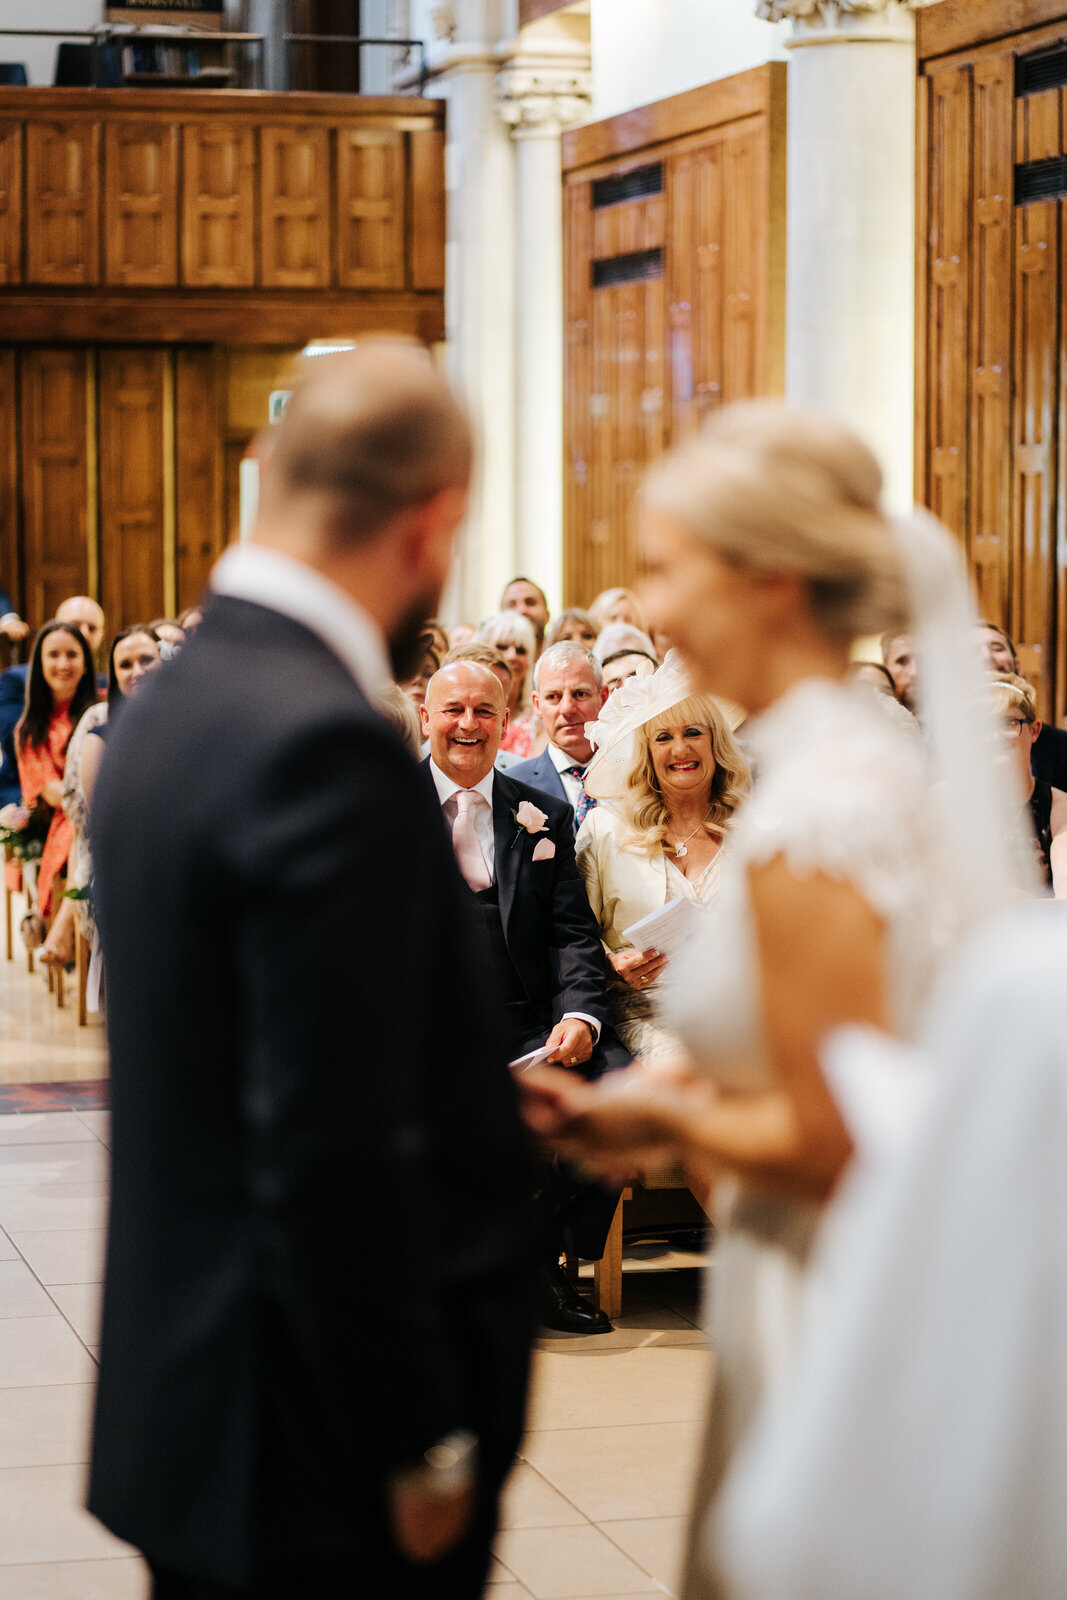 Bride and groom, blurred in the foreground, look towards their guests and make eye contact with the bride's parents, in focus, who smile at them